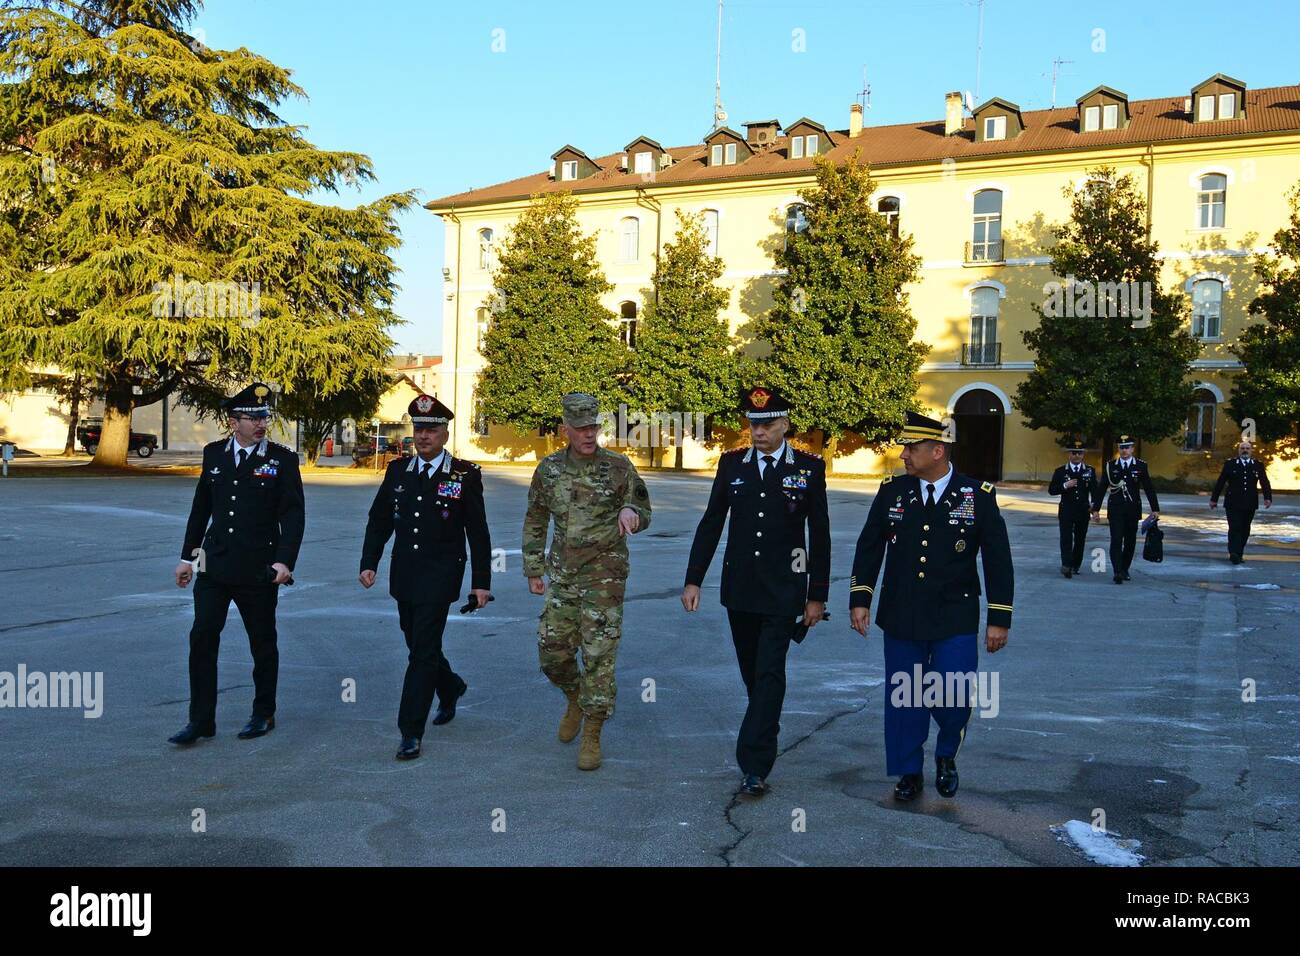 (From left), Col Pietro Carrozza, Carabinieri HQ Chief of plans and Military Police, Brig. Gen. Giovanni Pietro Barbano, Center of Excellence for Stability Police Units (CoESPU) director, Lt. Gen. Charles D. Luckey, Commanding General U.S. Army Reserve Command, Lt. Gen Vincenzo Coppola, Commanding General “Palidoro” Carabinieri Specialized and Mobile Units, U.S. Army Col. Darius S. Gallegos, CoESPU deputy director during visit at Center of Excellence for Stability Police Units (CoESPU) Vicenza, Italy, January 20, 2017. Stock Photo